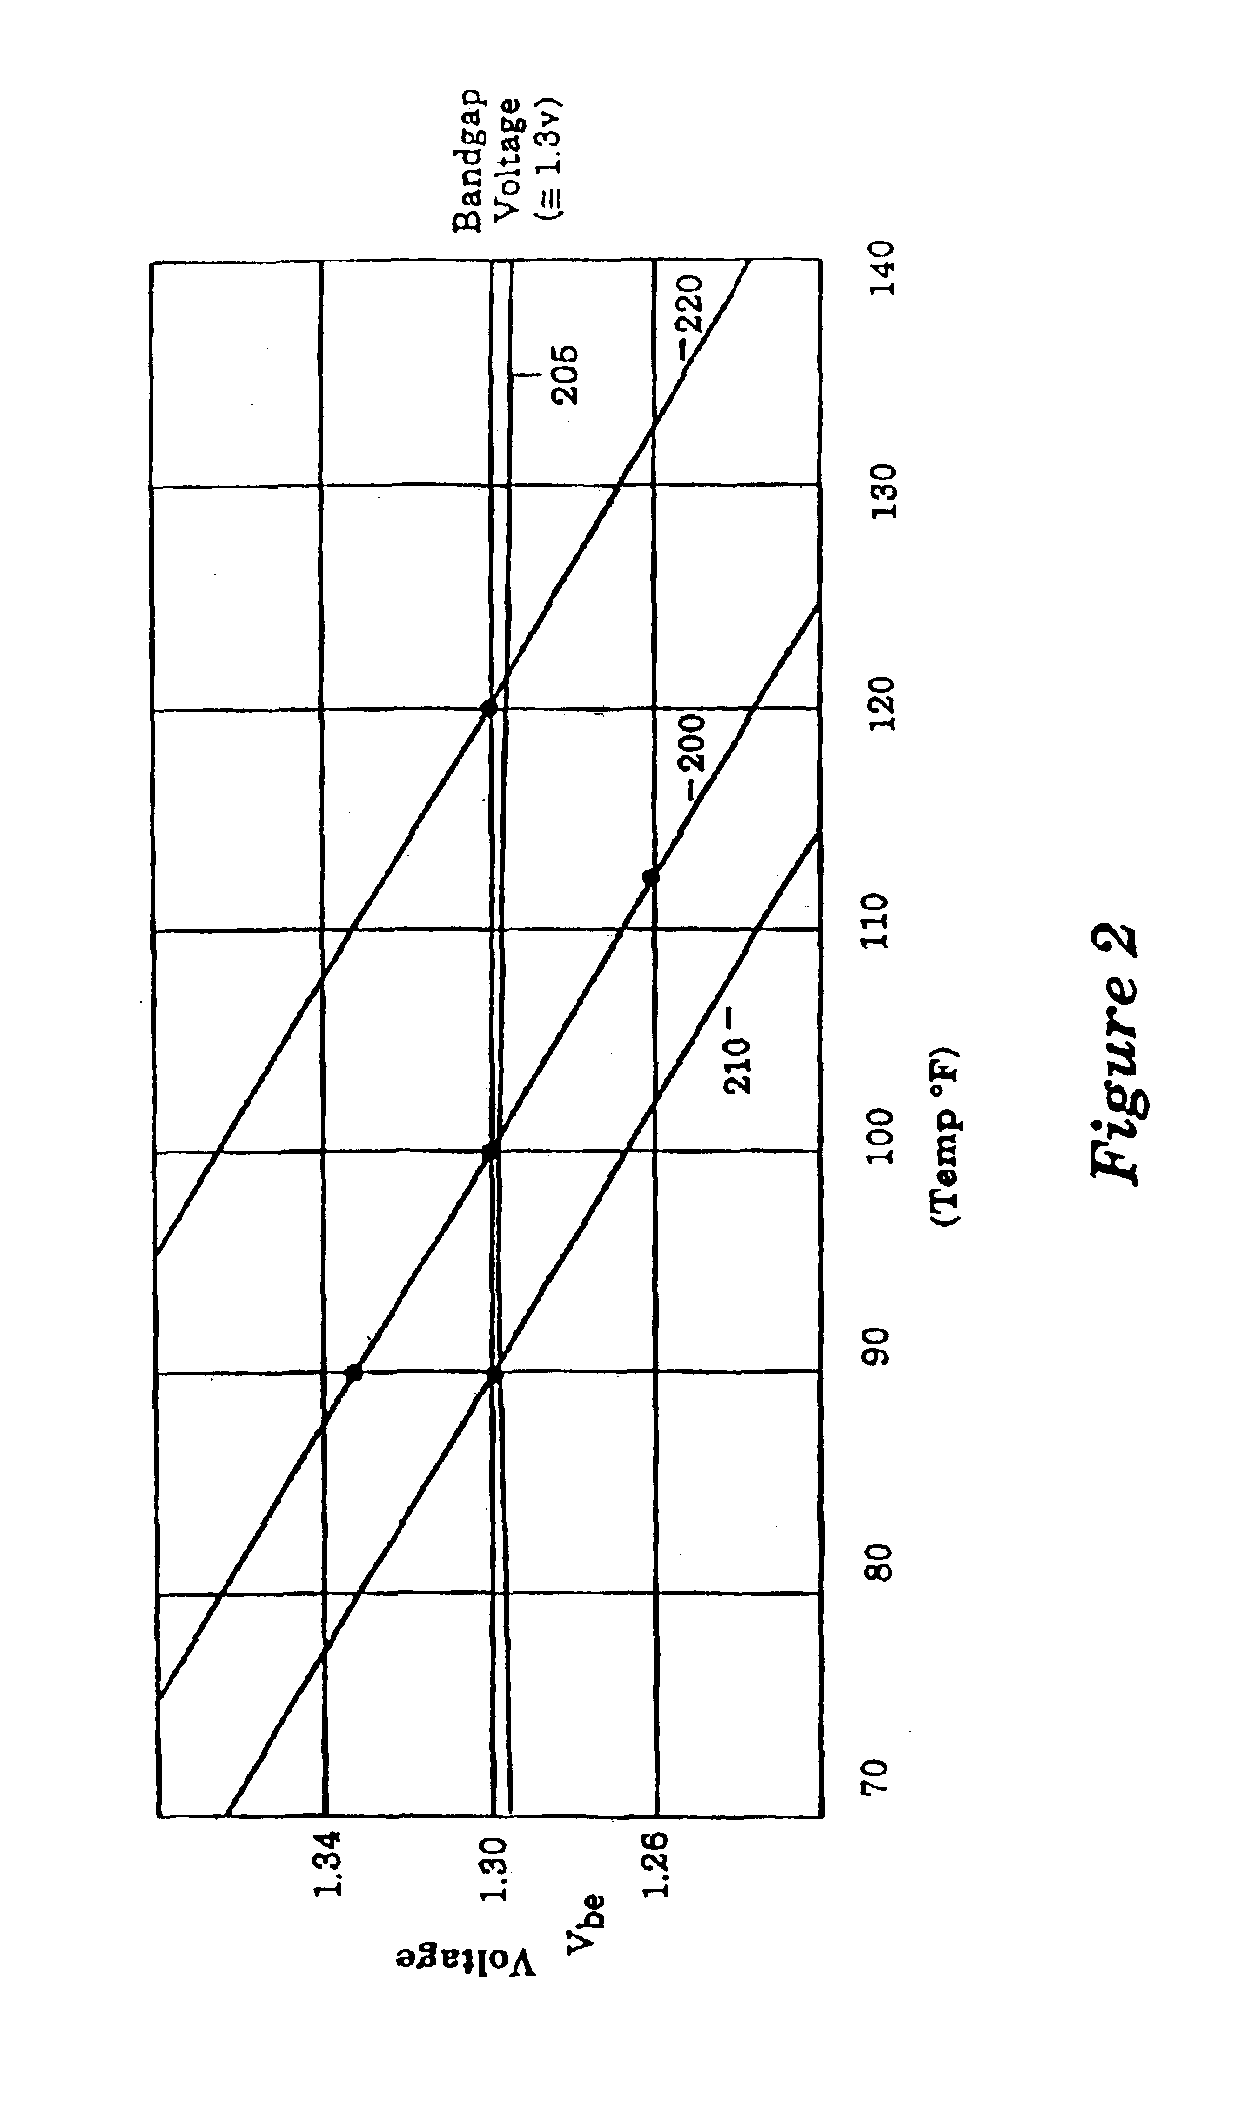 Temperature-based cooling device controller apparatus and method